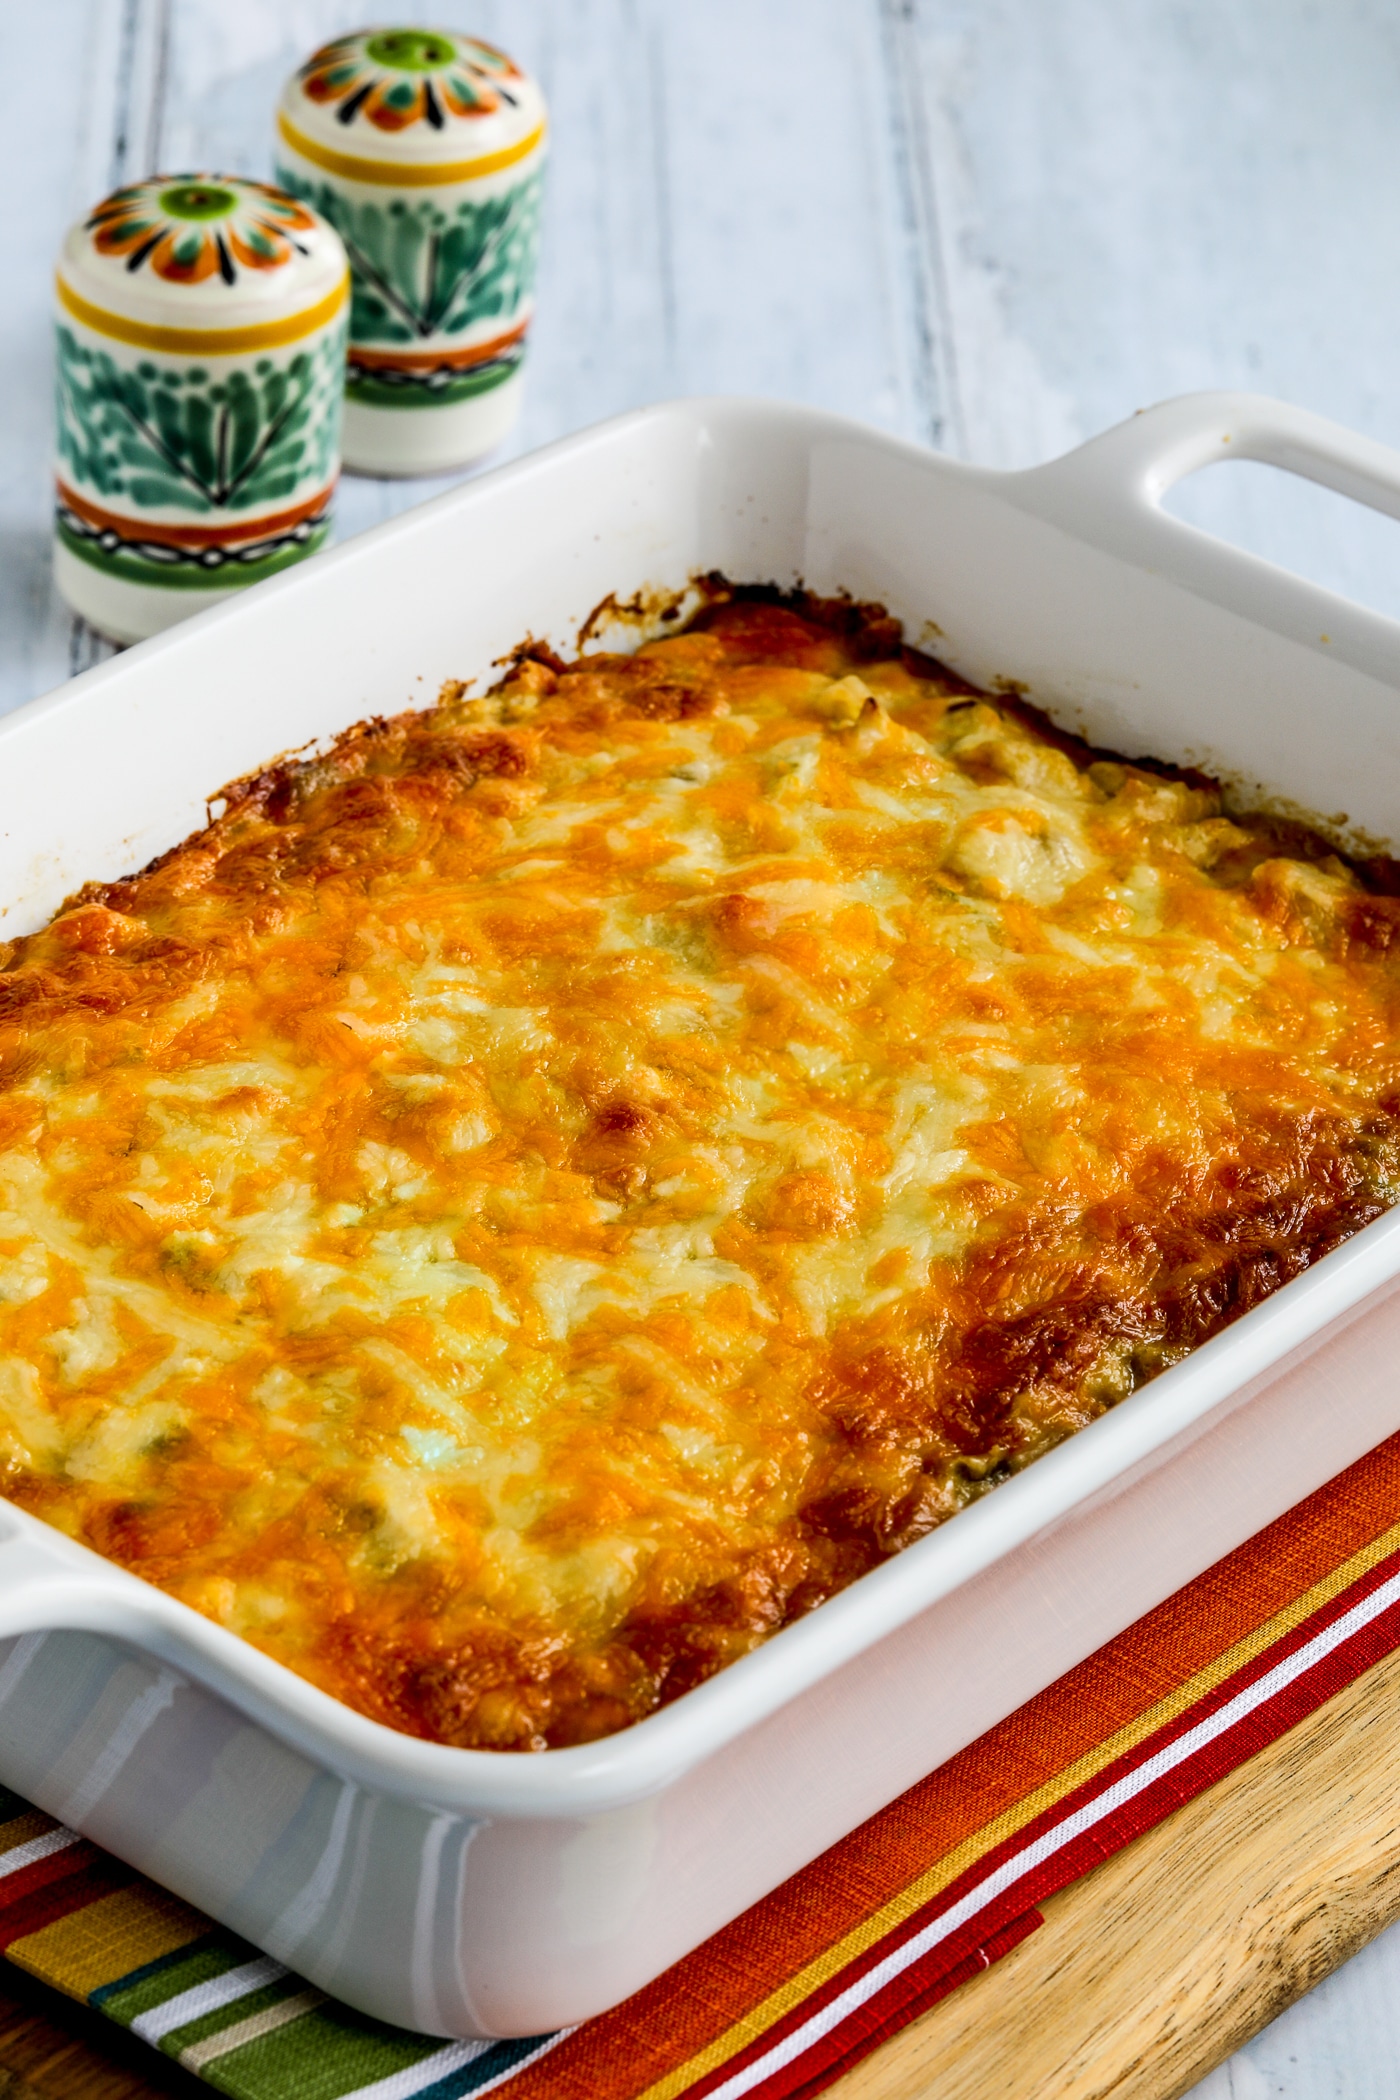 Layered Mexican casserole with chicken and cauliflower rice finished in a baking dish